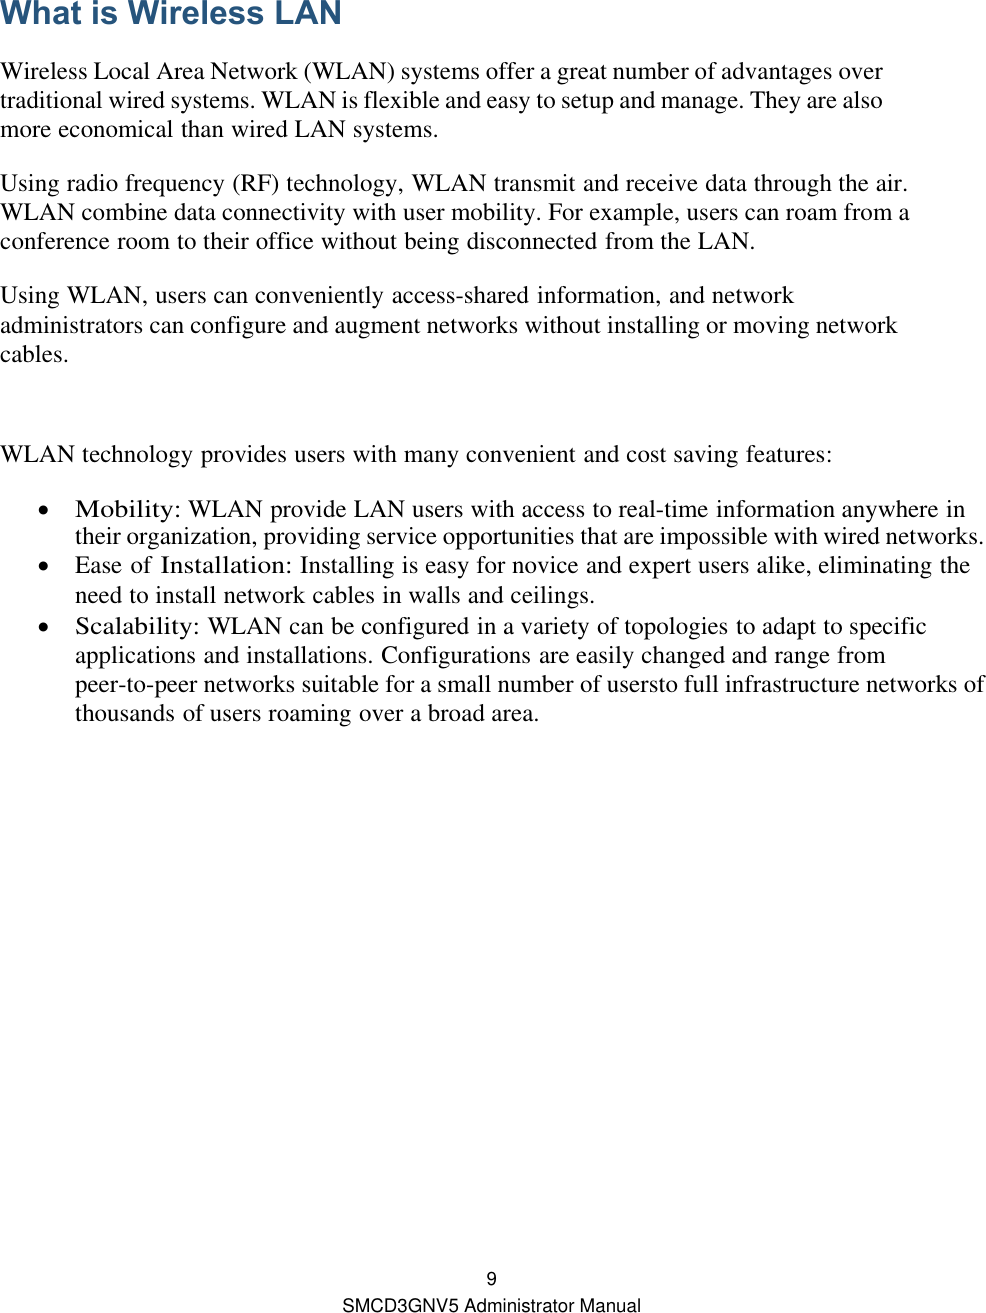  9 SMCD3GNV5 Administrator Manual  What is Wireless LAN Wireless Local Area Network (WLAN) systems offer a great number of advantages over traditional wired systems. WLAN is flexible and easy to setup and manage. They are also more economical than wired LAN systems. Using radio frequency (RF) technology, WLAN transmit and receive data through the air. WLAN combine data connectivity with user mobility. For example, users can roam from a conference room to their office without being disconnected from the LAN. Using WLAN, users can conveniently access-shared information, and network administrators can configure and augment networks without installing or moving network cables.  WLAN technology provides users with many convenient and cost saving features:  Mobility: WLAN provide LAN users with access to real-time information anywhere in their organization, providing service opportunities that are impossible with wired networks.  Ease of Installation: Installing is easy for novice and expert users alike, eliminating the need to install network cables in walls and ceilings.  Scalability: WLAN can be configured in a variety of topologies to adapt to specific applications and installations. Configurations are easily changed and range from peer-to-peer networks suitable for a small number of usersto full infrastructure networks of thousands of users roaming over a broad area.  